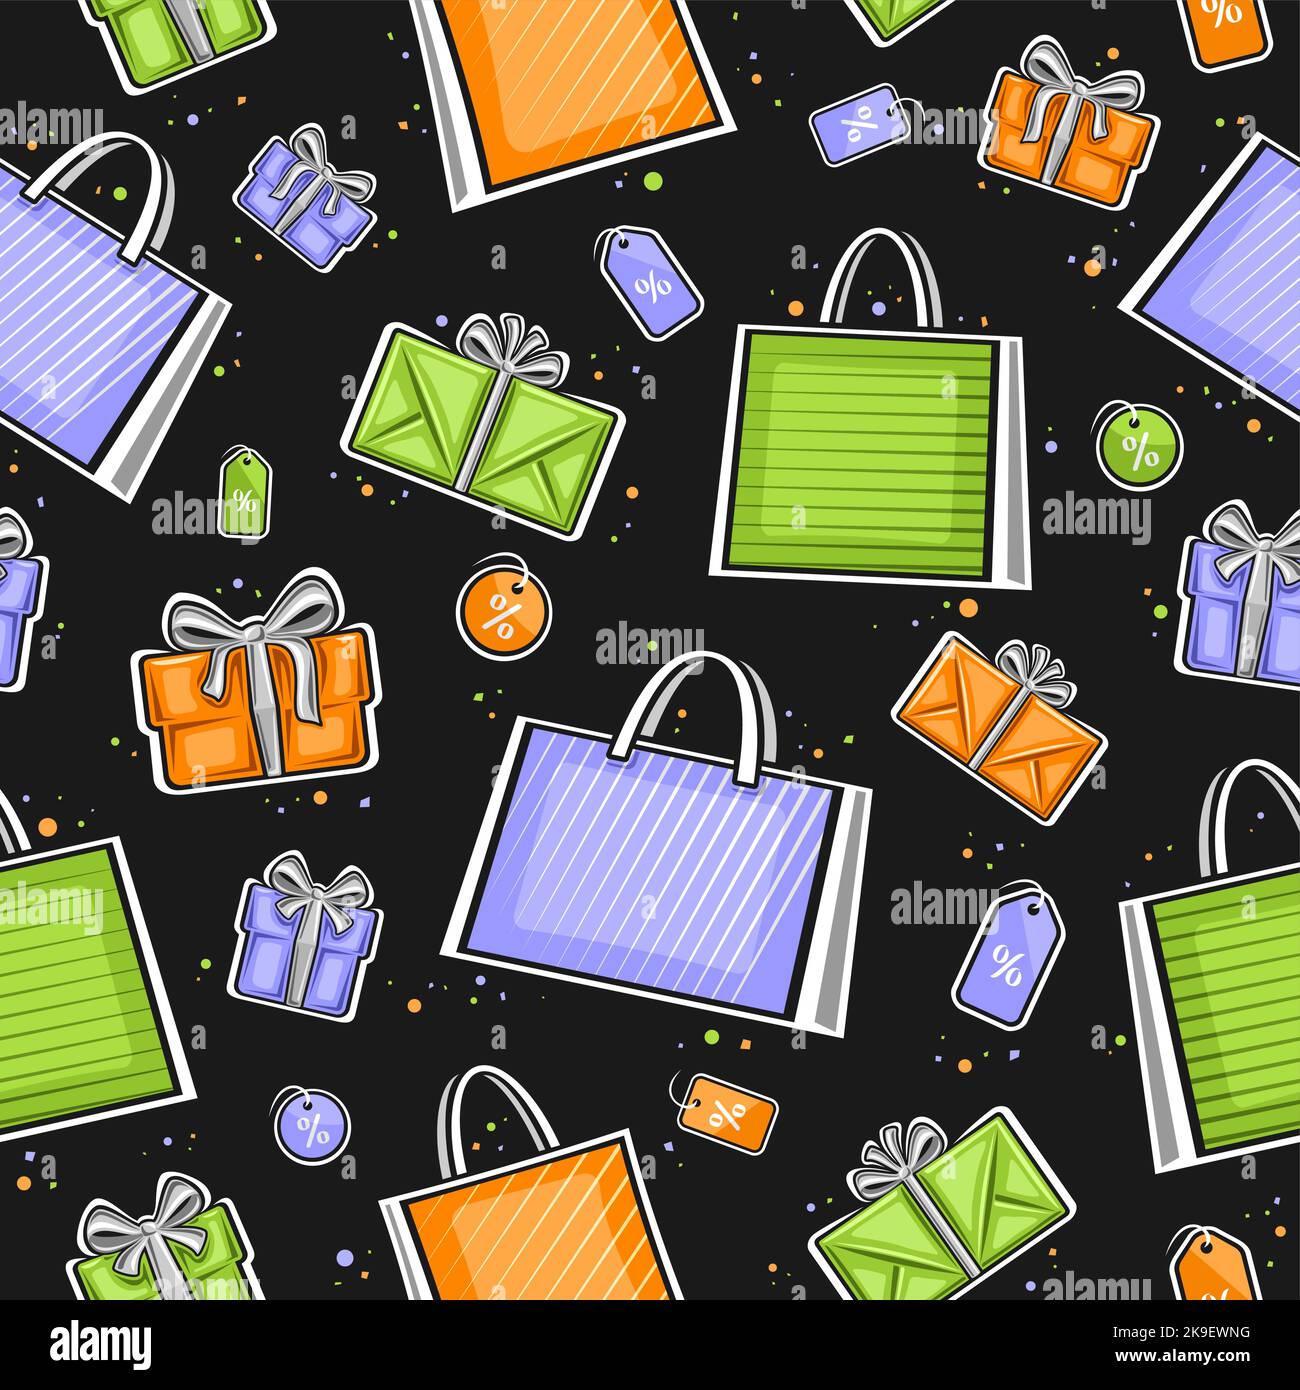 Vector Shopping seamless pattern, square repeating background with illustrations of blue paper bags, orange gift boxes and green decorative price tags Stock Vector